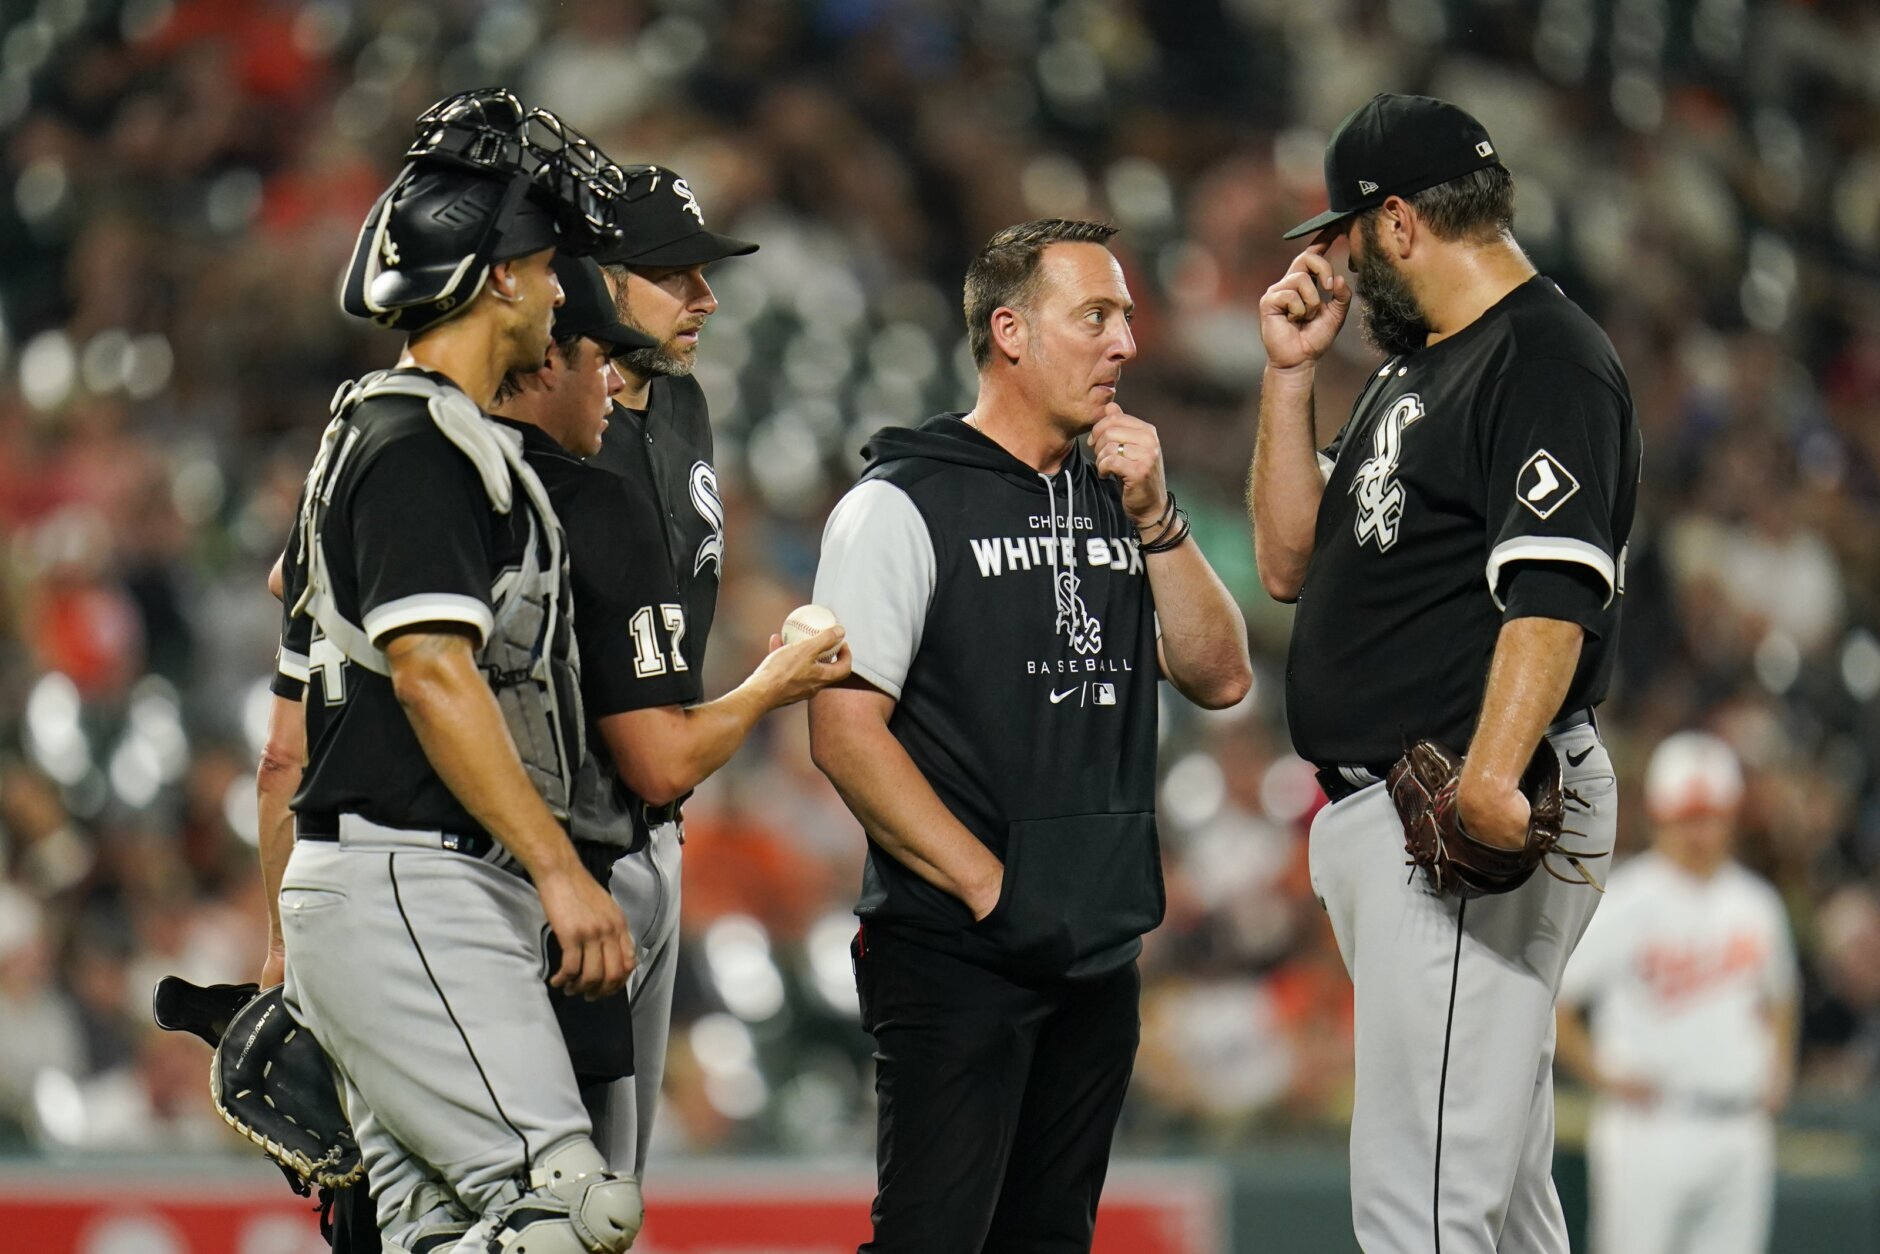 The Chicago White Sox defeated the Baltimore Orioles, 5 to 4, on